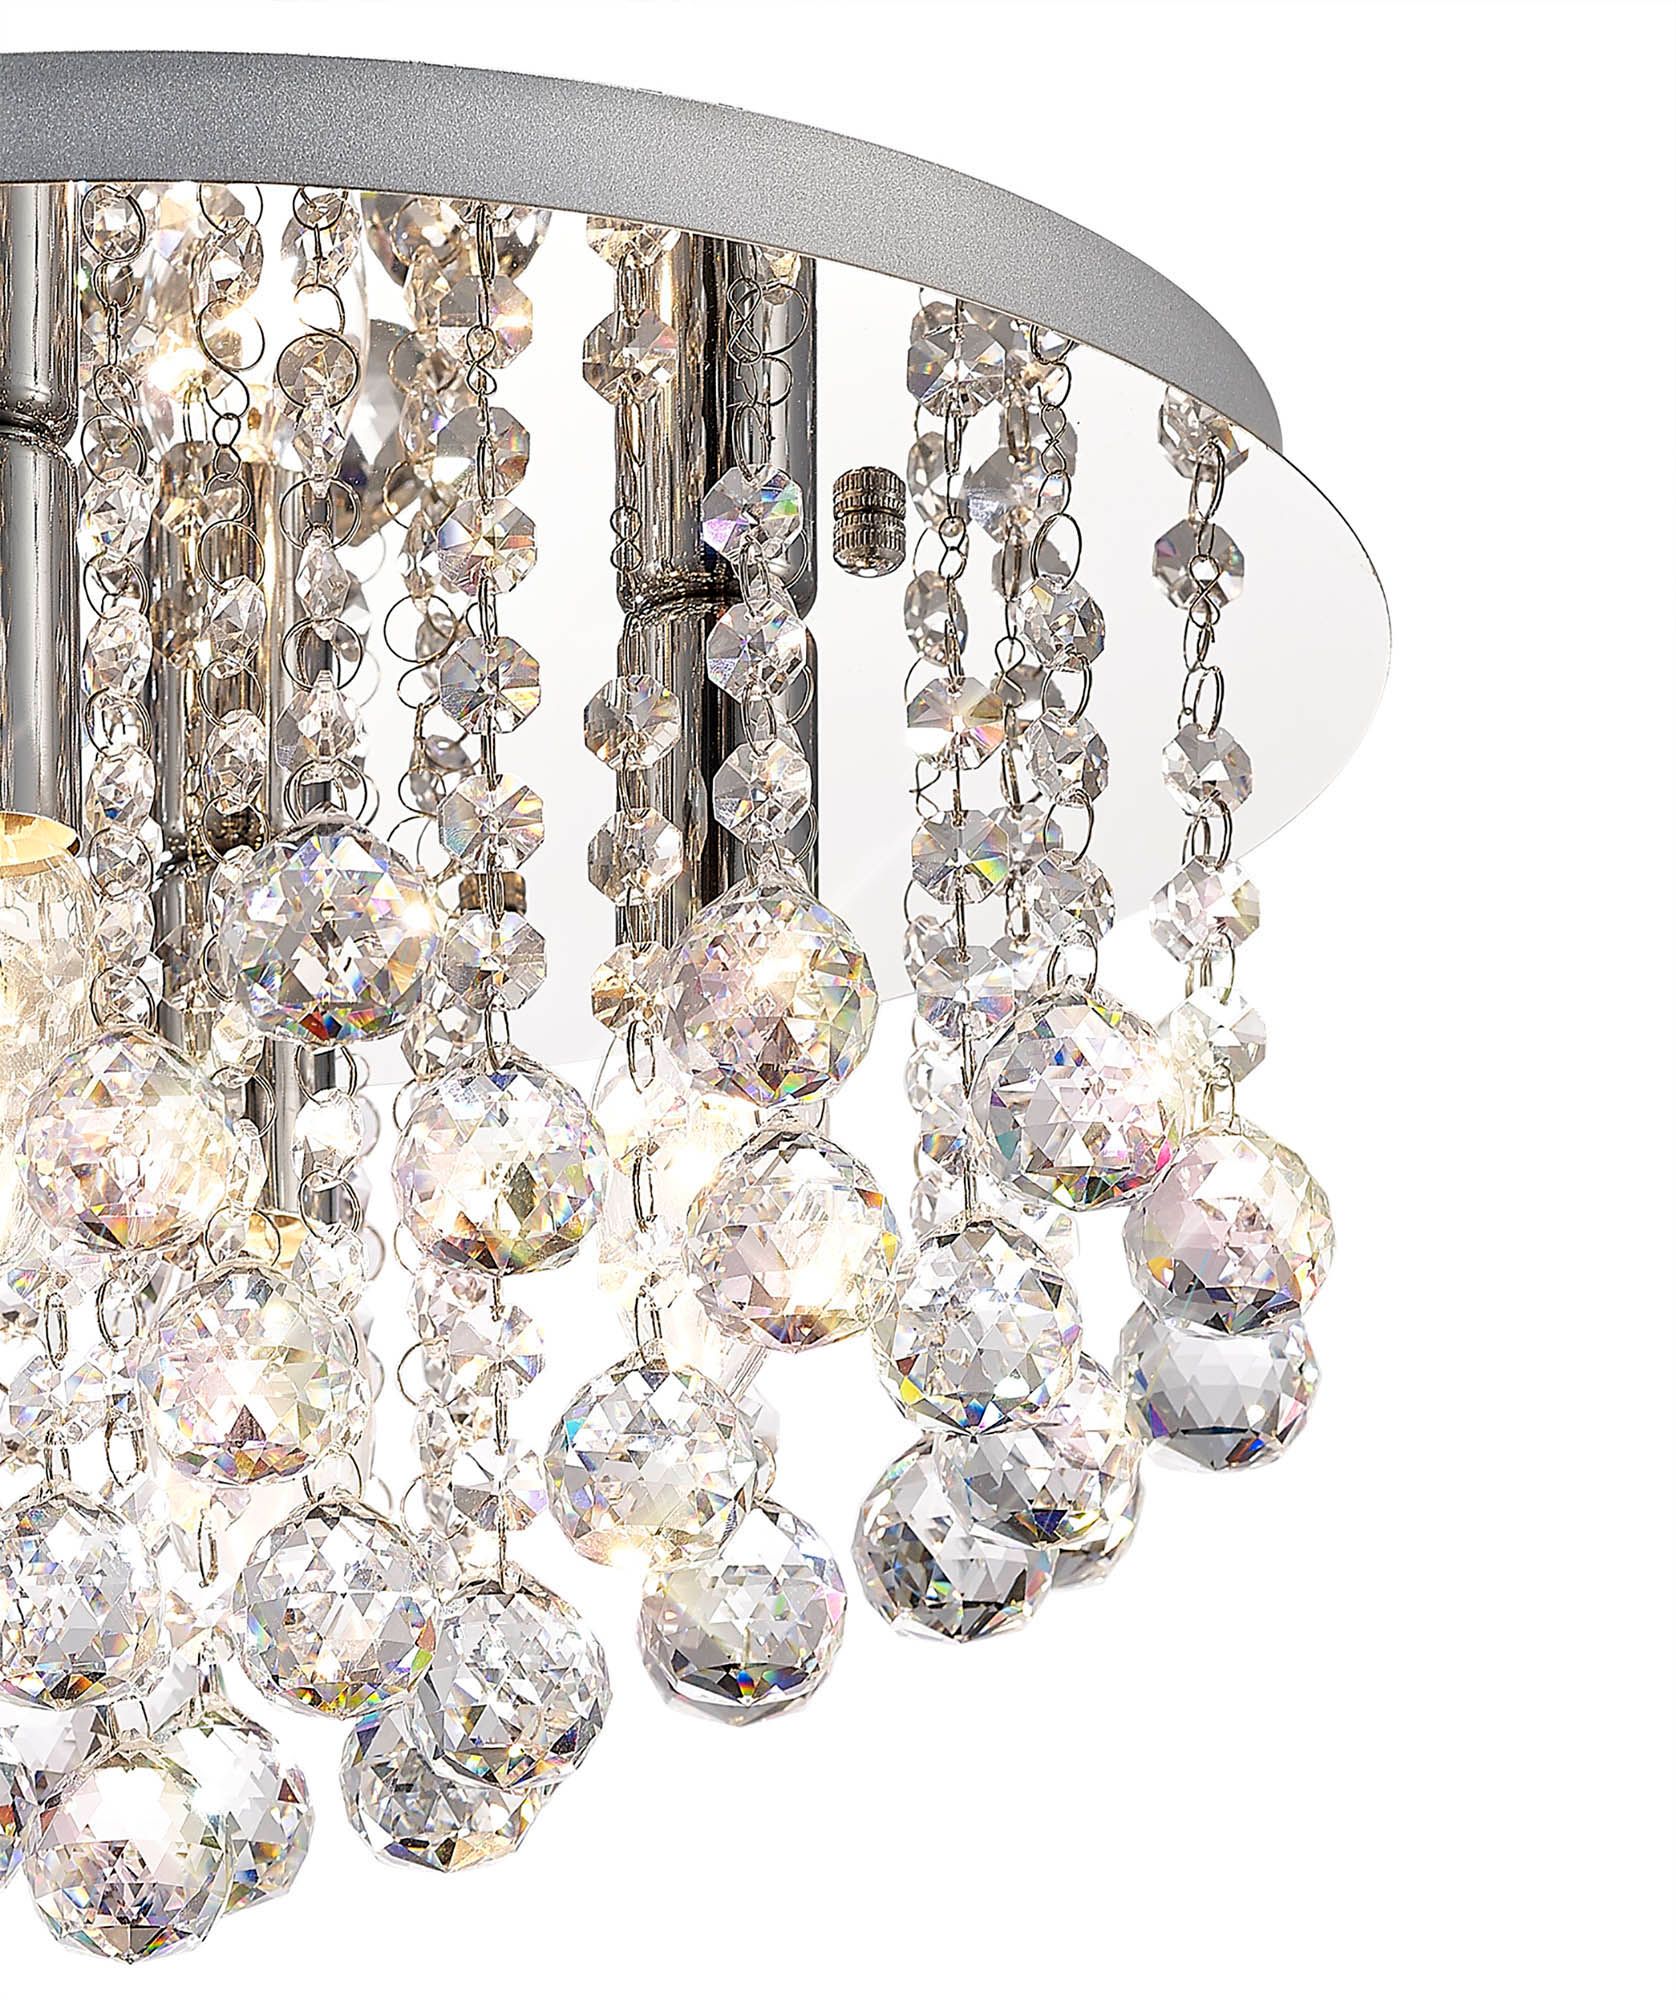 Acton Flush Ceiling 4 Light E14, 380mm Round, Polished Chrome, Antique Brass/Sphere Crystal - Cusack Lighting